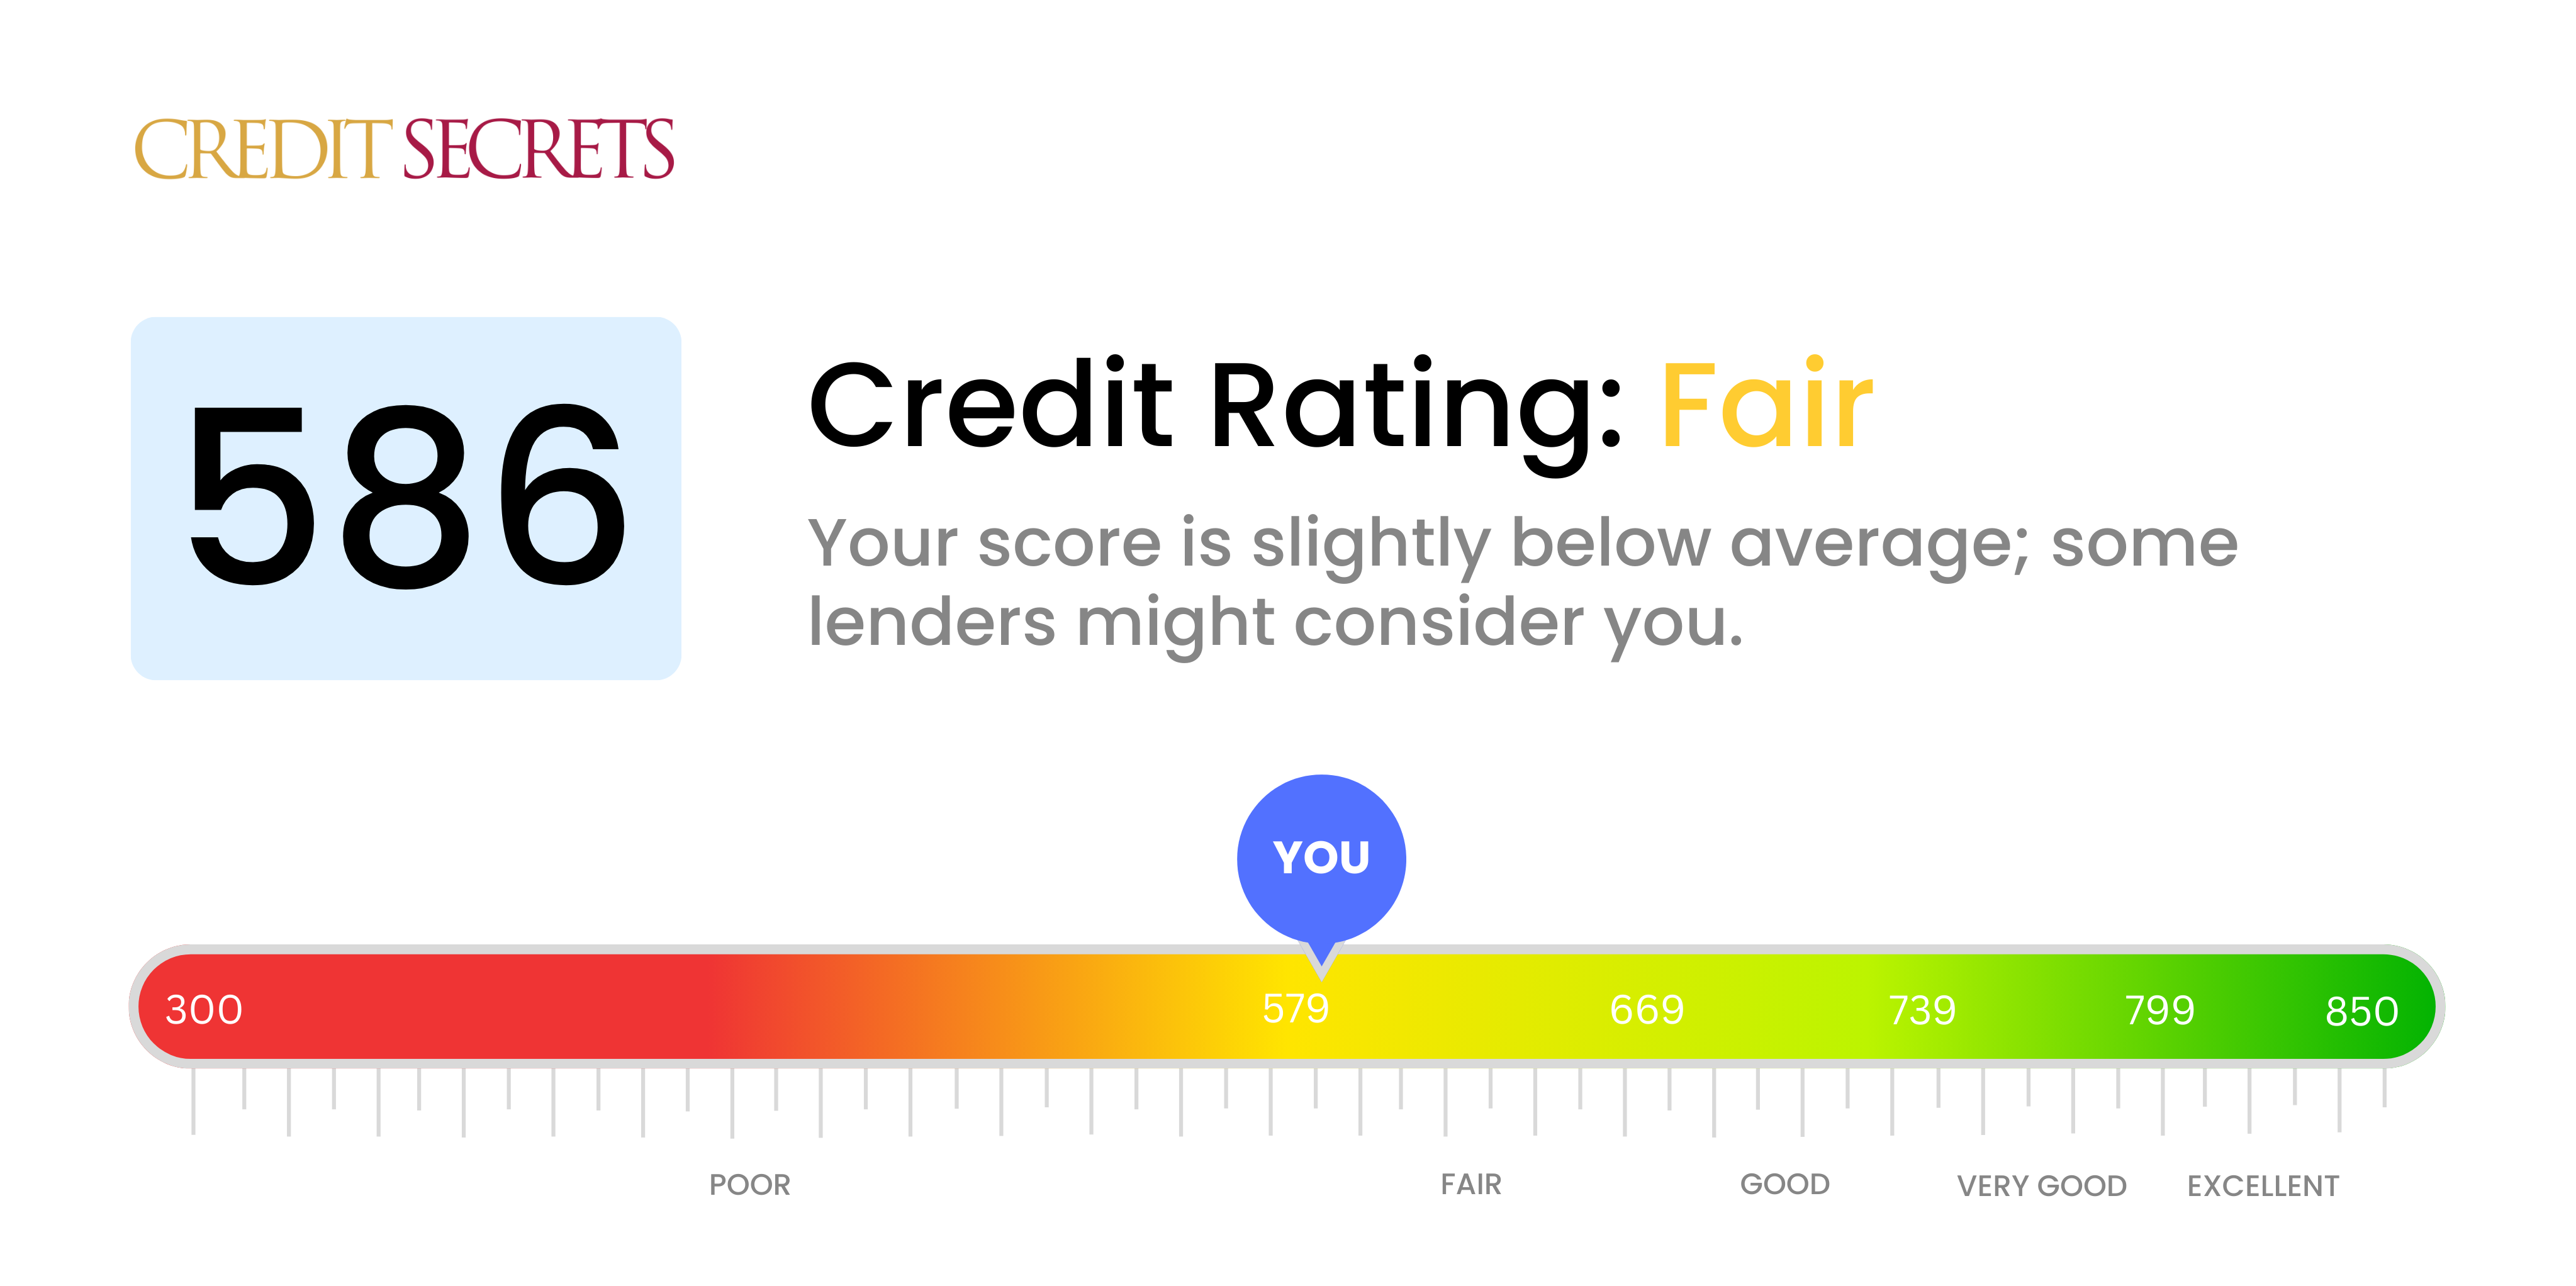 Is 586 a good credit score?